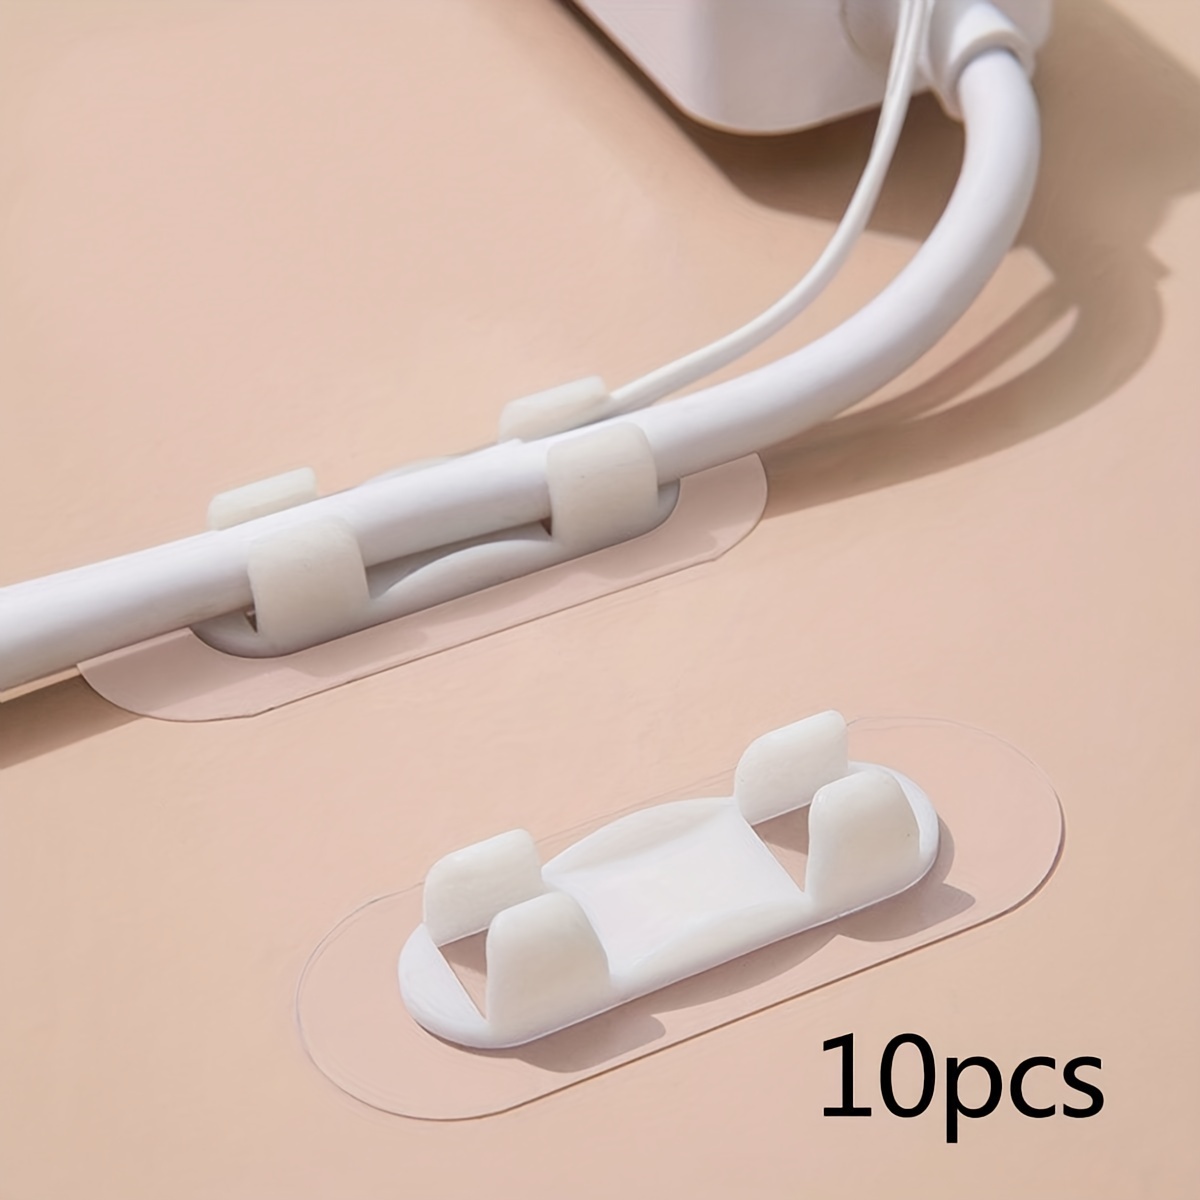 1PCS/ 3 PCS Hide Fixed Tv Compute Desk Cables Wires Hider Concealer on Wall  Cover Management Storage Holder Electrical Cord Covers Cable Tidy Protector  Solutions